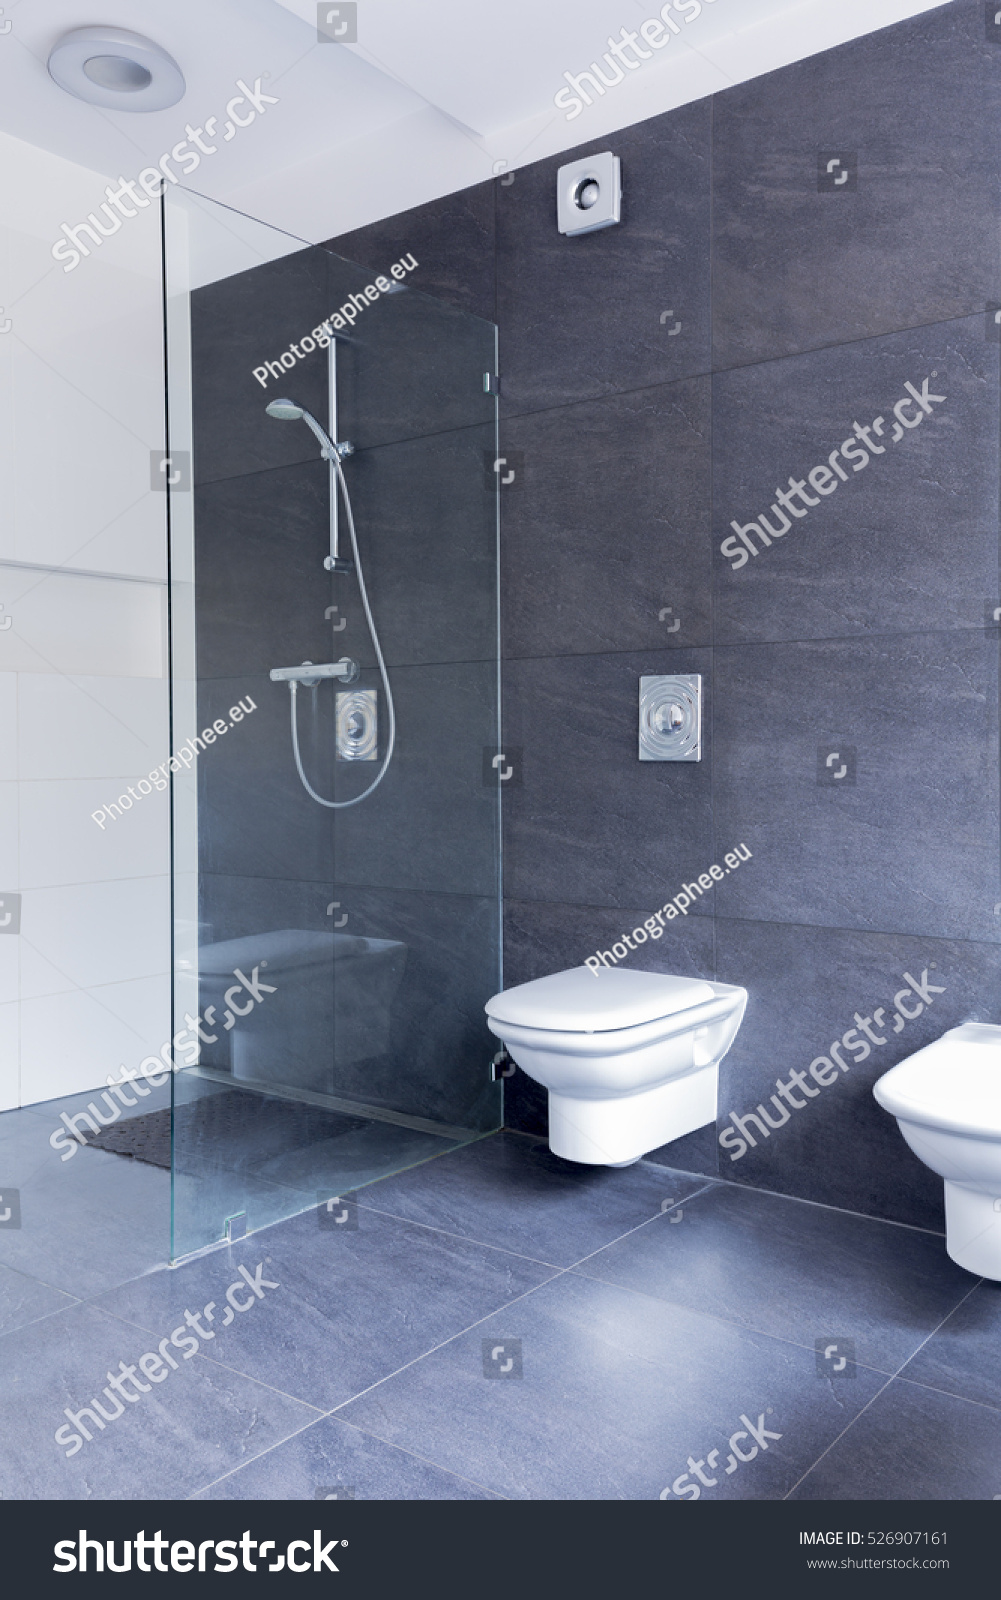 Stock Photo Luxurious Grey Bathroom With Large Granite Tiles On The Floor And Walls And Glass Shower Screen 526907161 